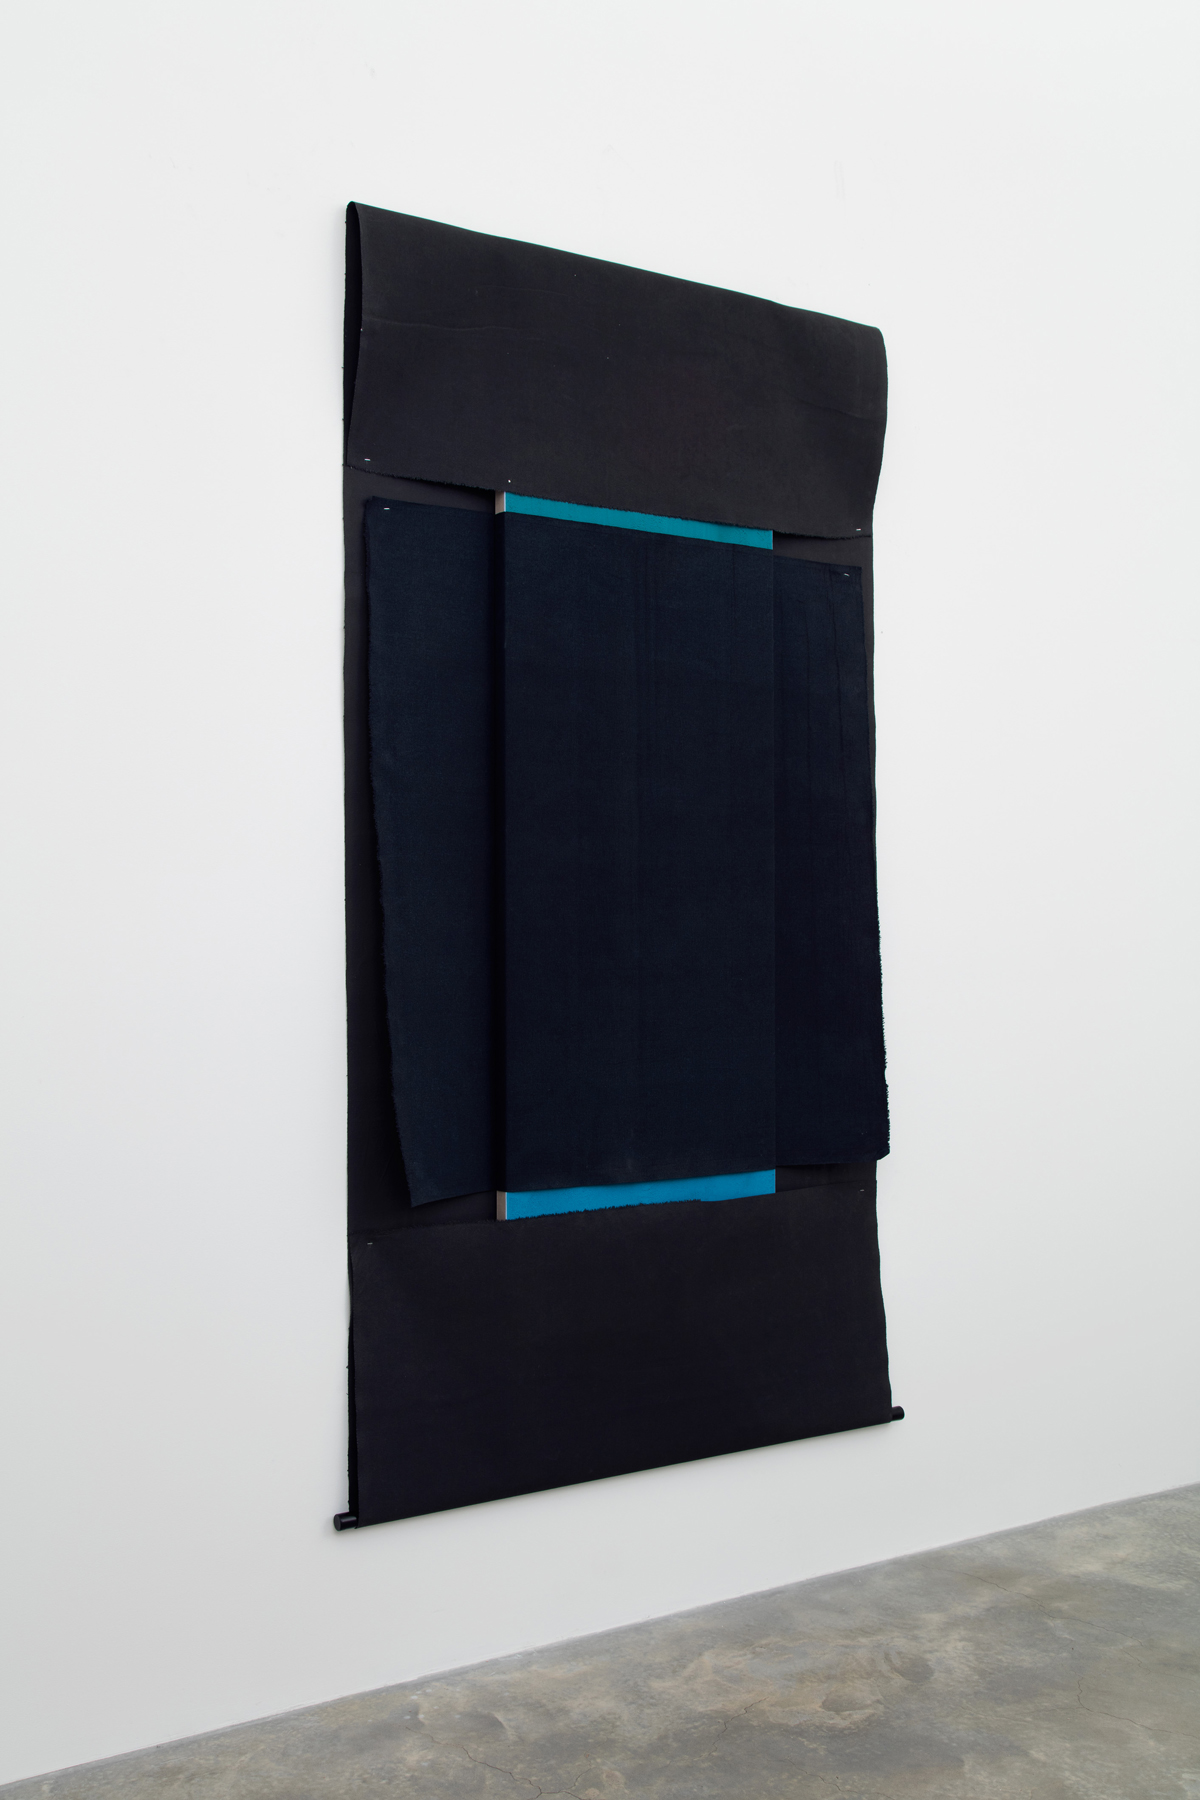 N. Dash, Untitled, 2017, oil, pigment, acrylic, linen, wooden stick, wood support, photo Jean Vong, Courtesy the artist, Casey Kaplan Gallery, New York, and Mehdi Chouakri, Berlin